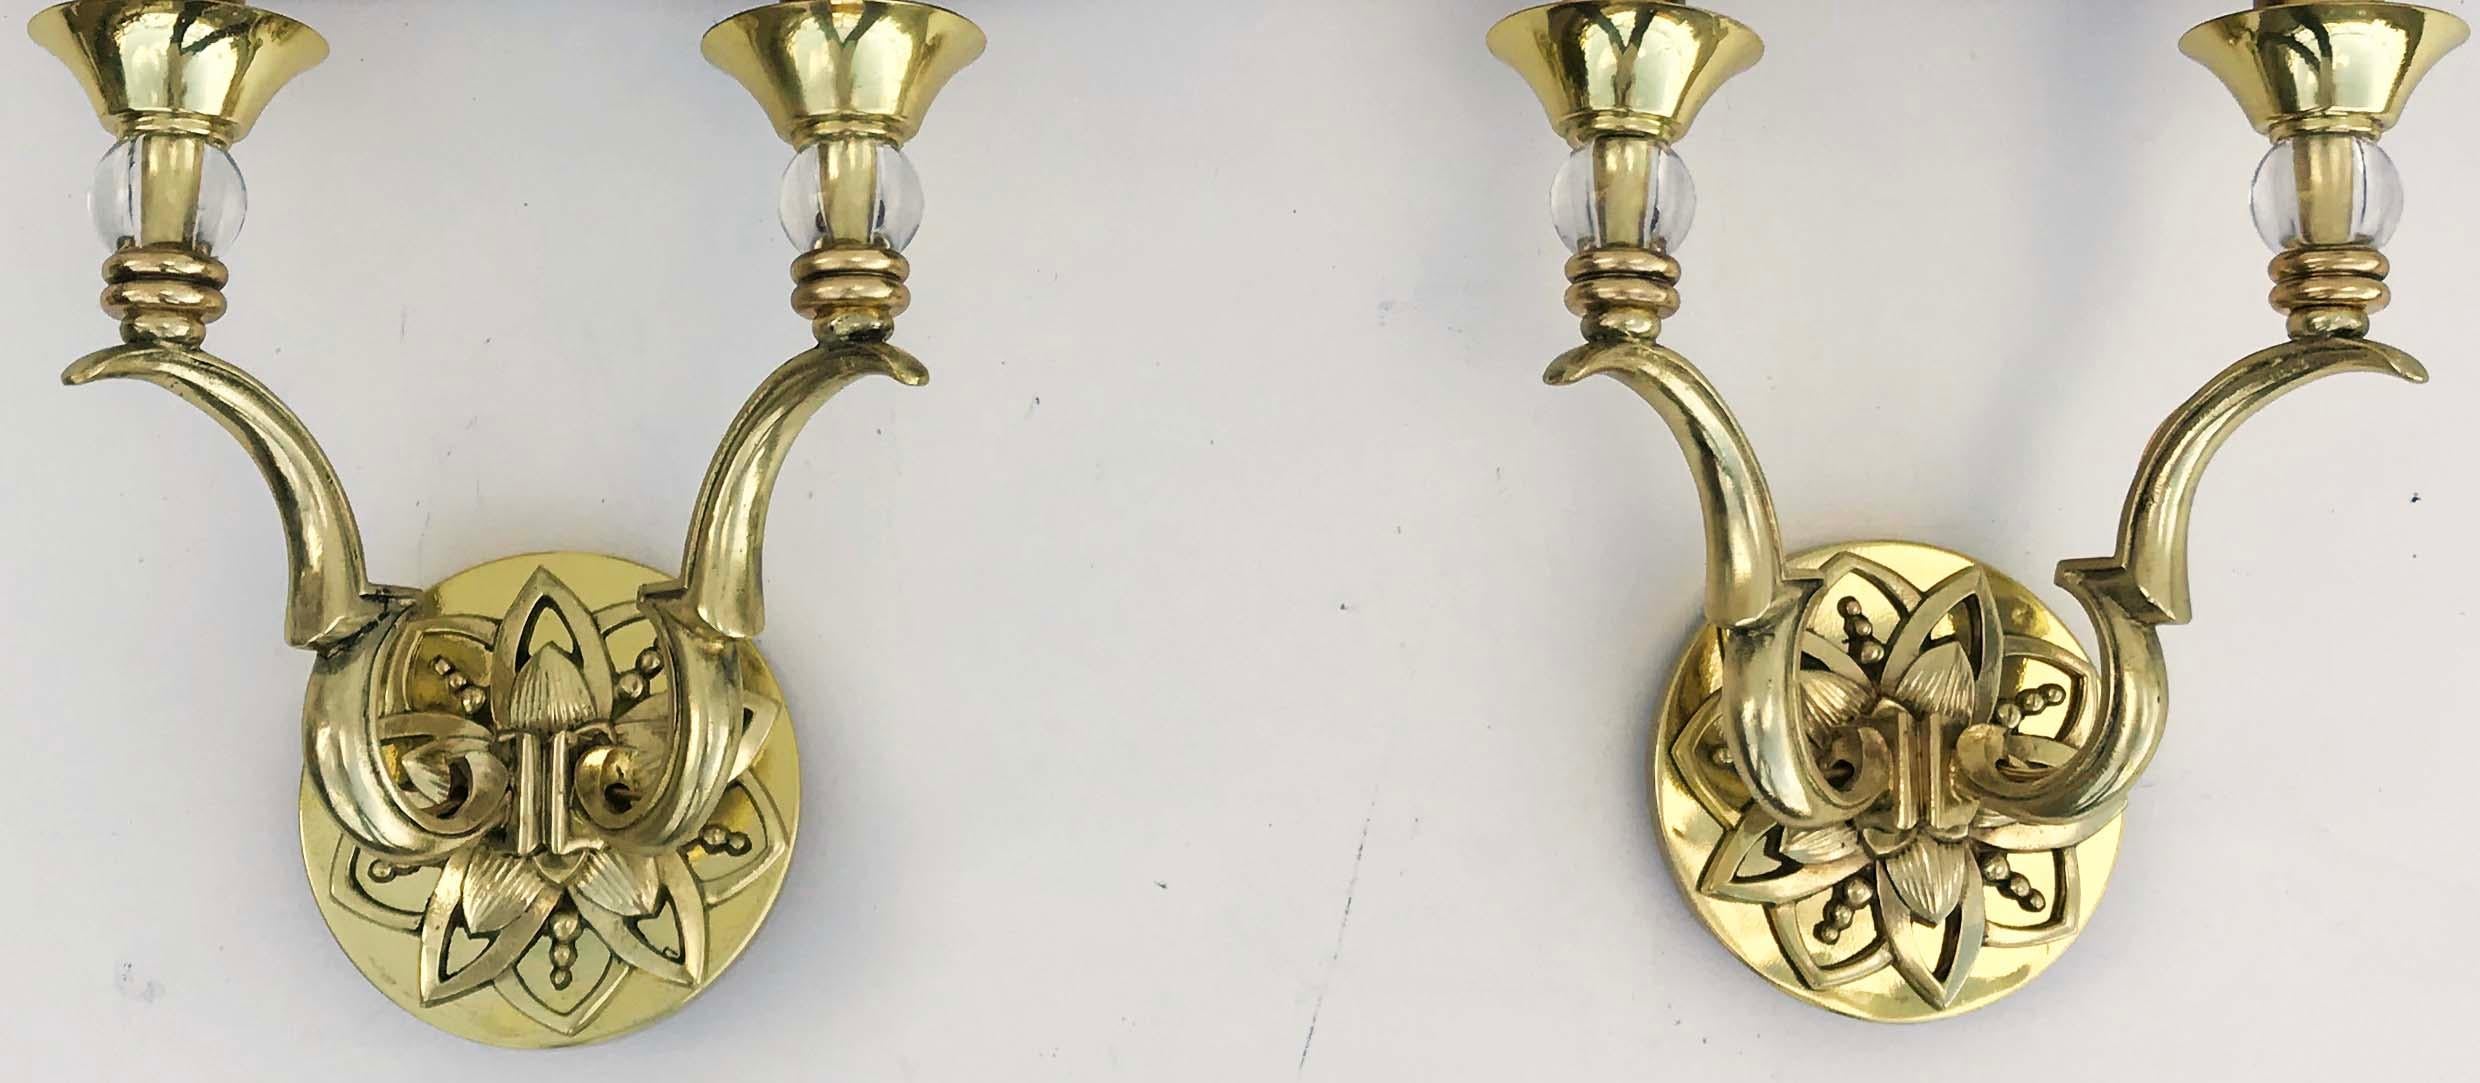 Superb pair of Maison Jansen sconces
2 lights, 40 watts max bulb
US rewired and in working condition
Totally restored and refinished
Back plate measures: 5